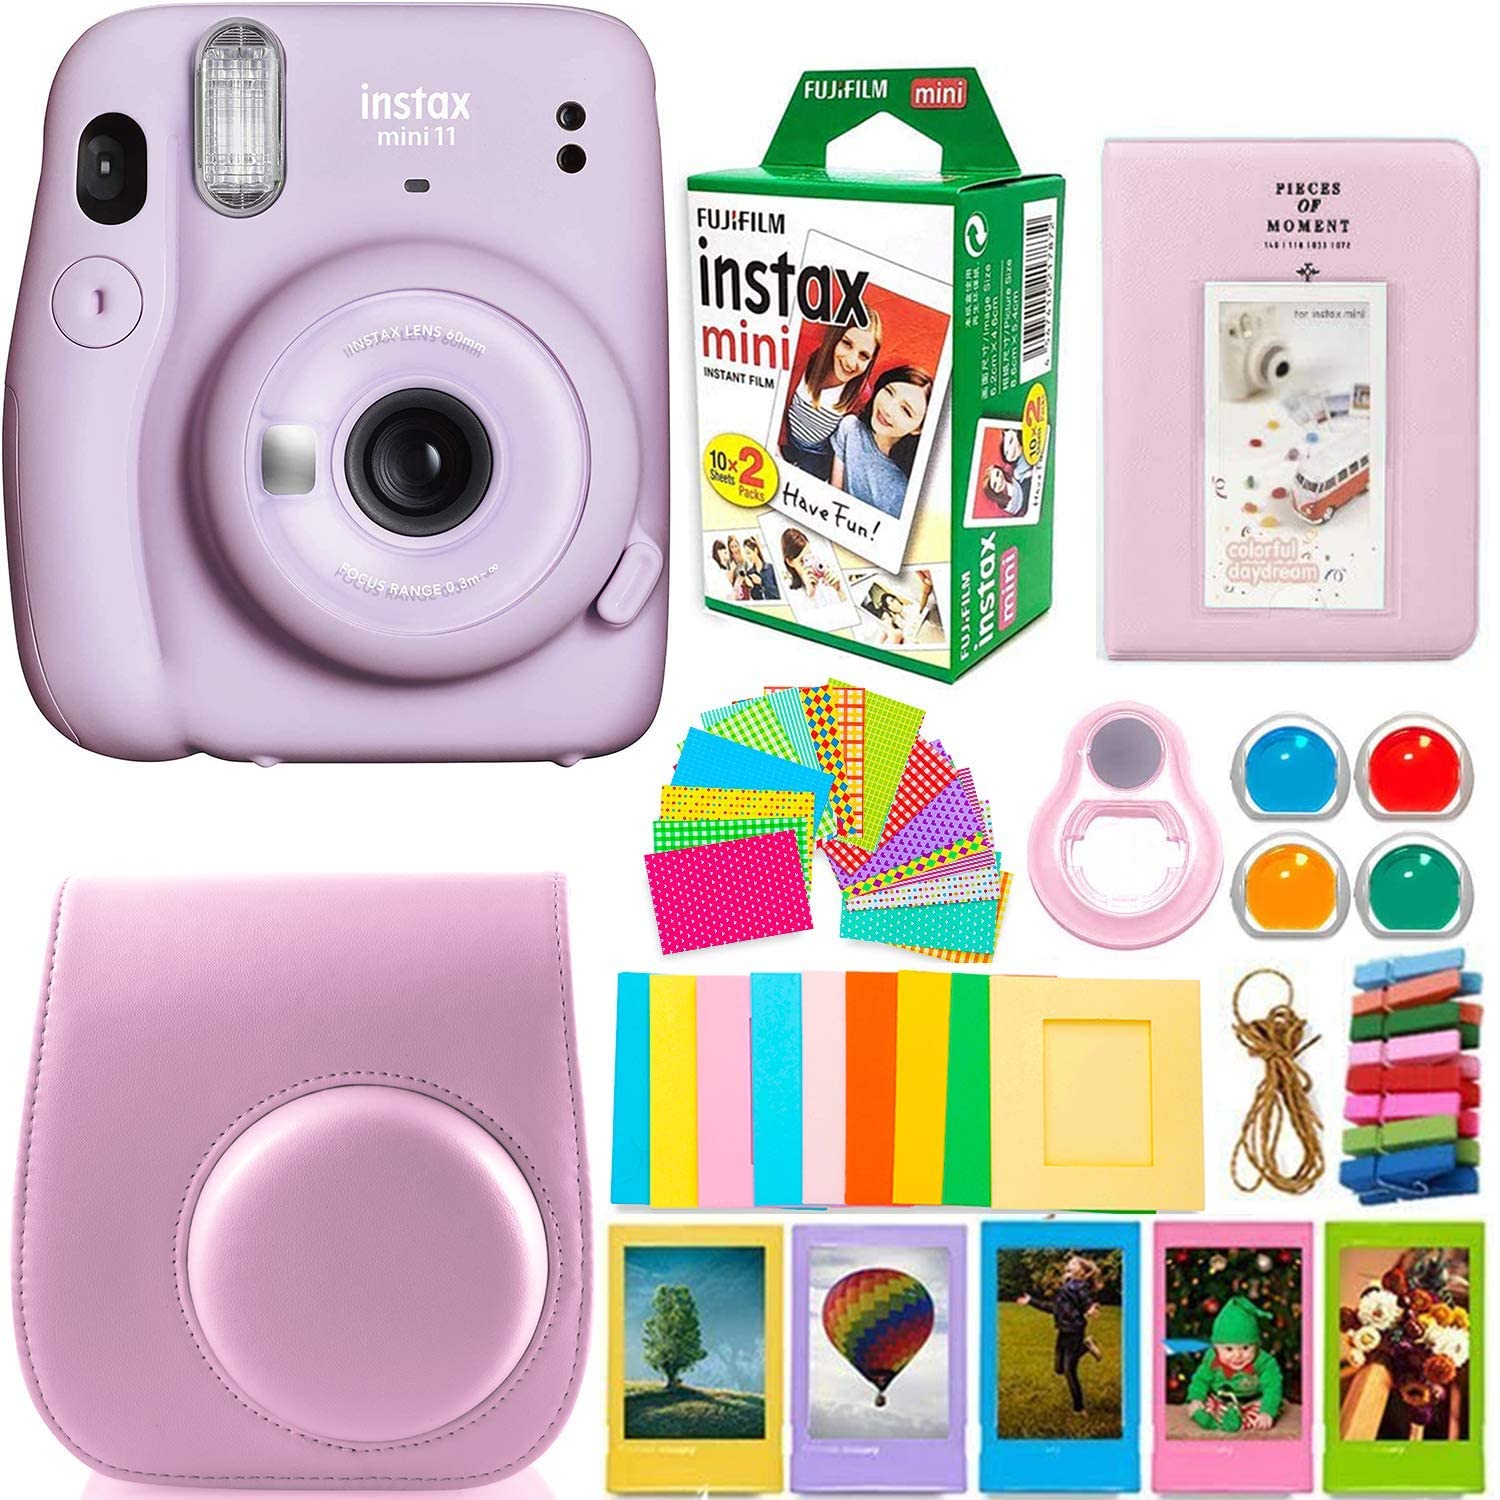 Fujifilm Instax Mini 11 Camera with Instant Film (20 Sheets) & DNO Accessories Bundle Includes Case, Filters, Album, Lens, and More (Lilac Purple)